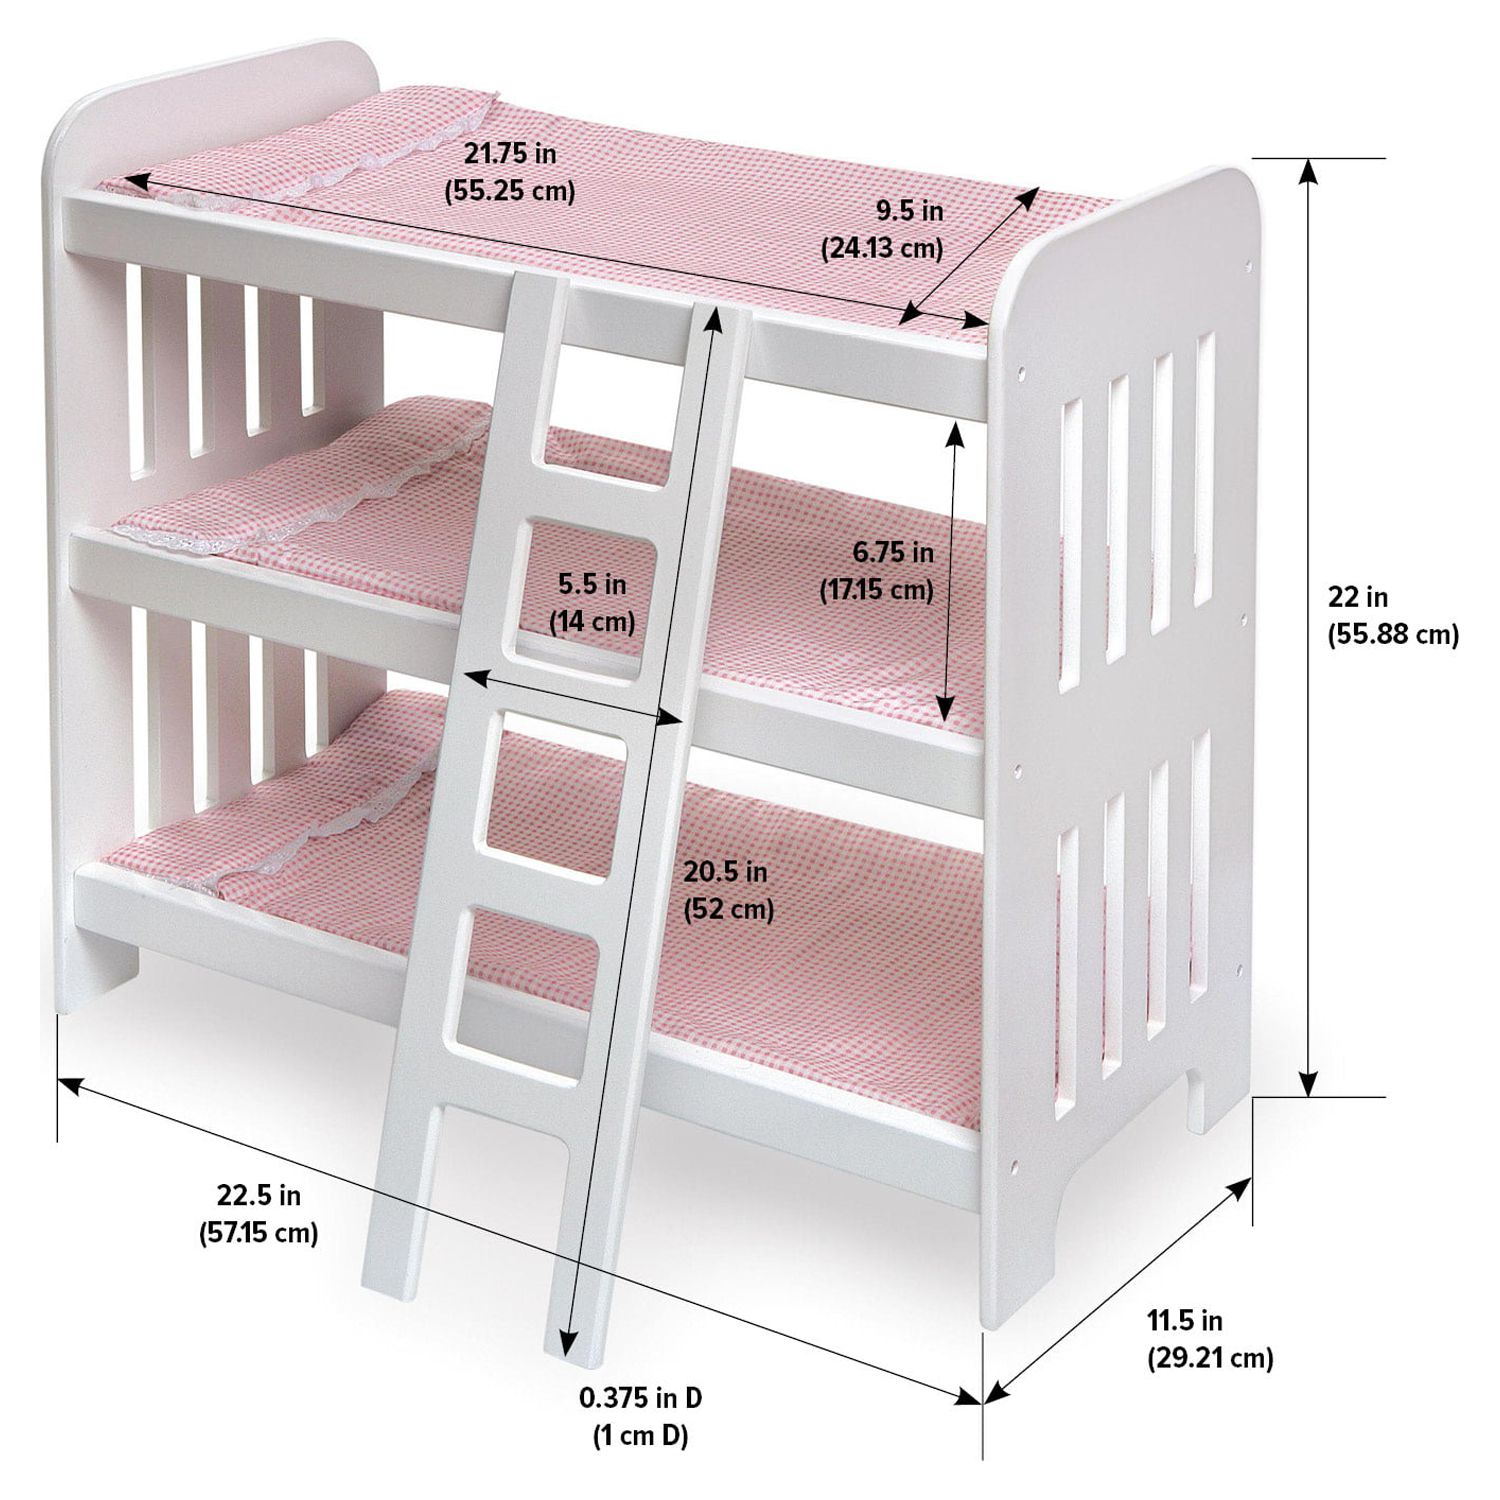 Badger Basket Triple Doll Bunk Bed with Ladder, Bedding, and Free Personalization Kit - Pink Gingham - image 5 of 12